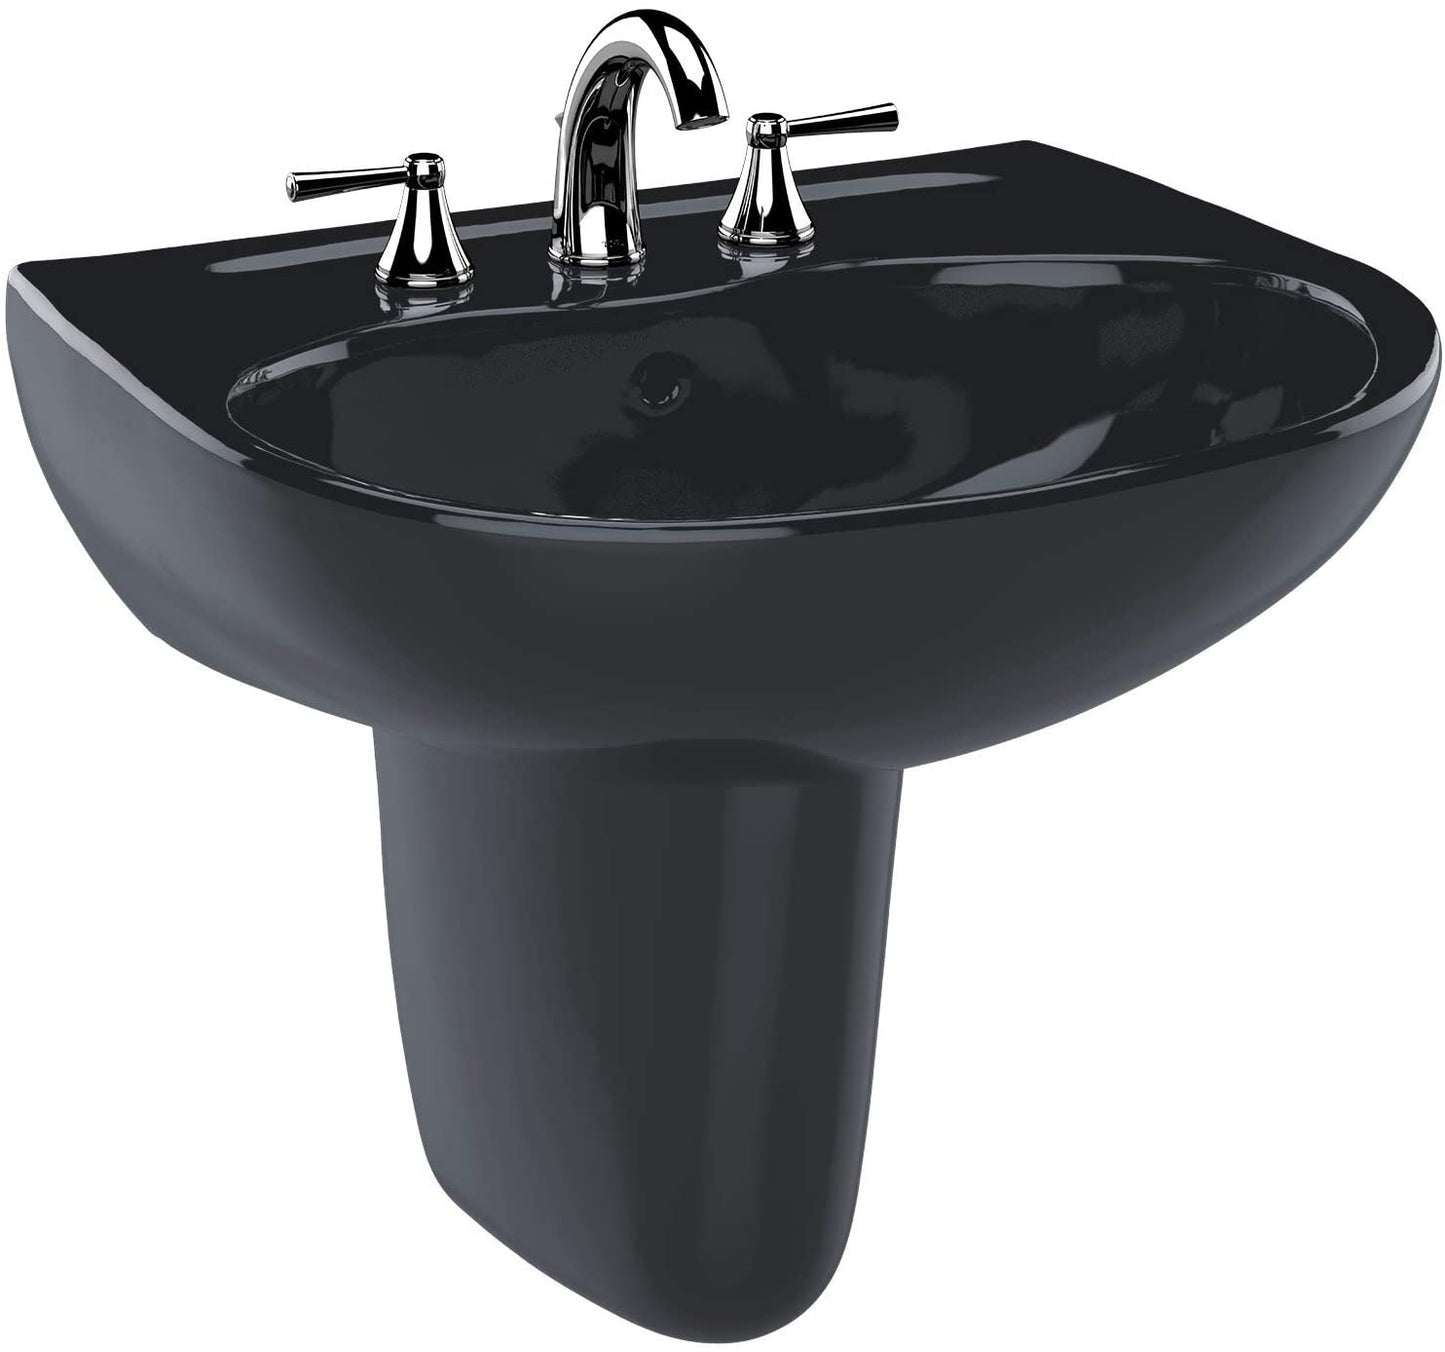 Toto LHT241#51 - Supreme 22-7/8" Wall Mounted Bathroom Sink with Single Faucet Hole Drilled and Over